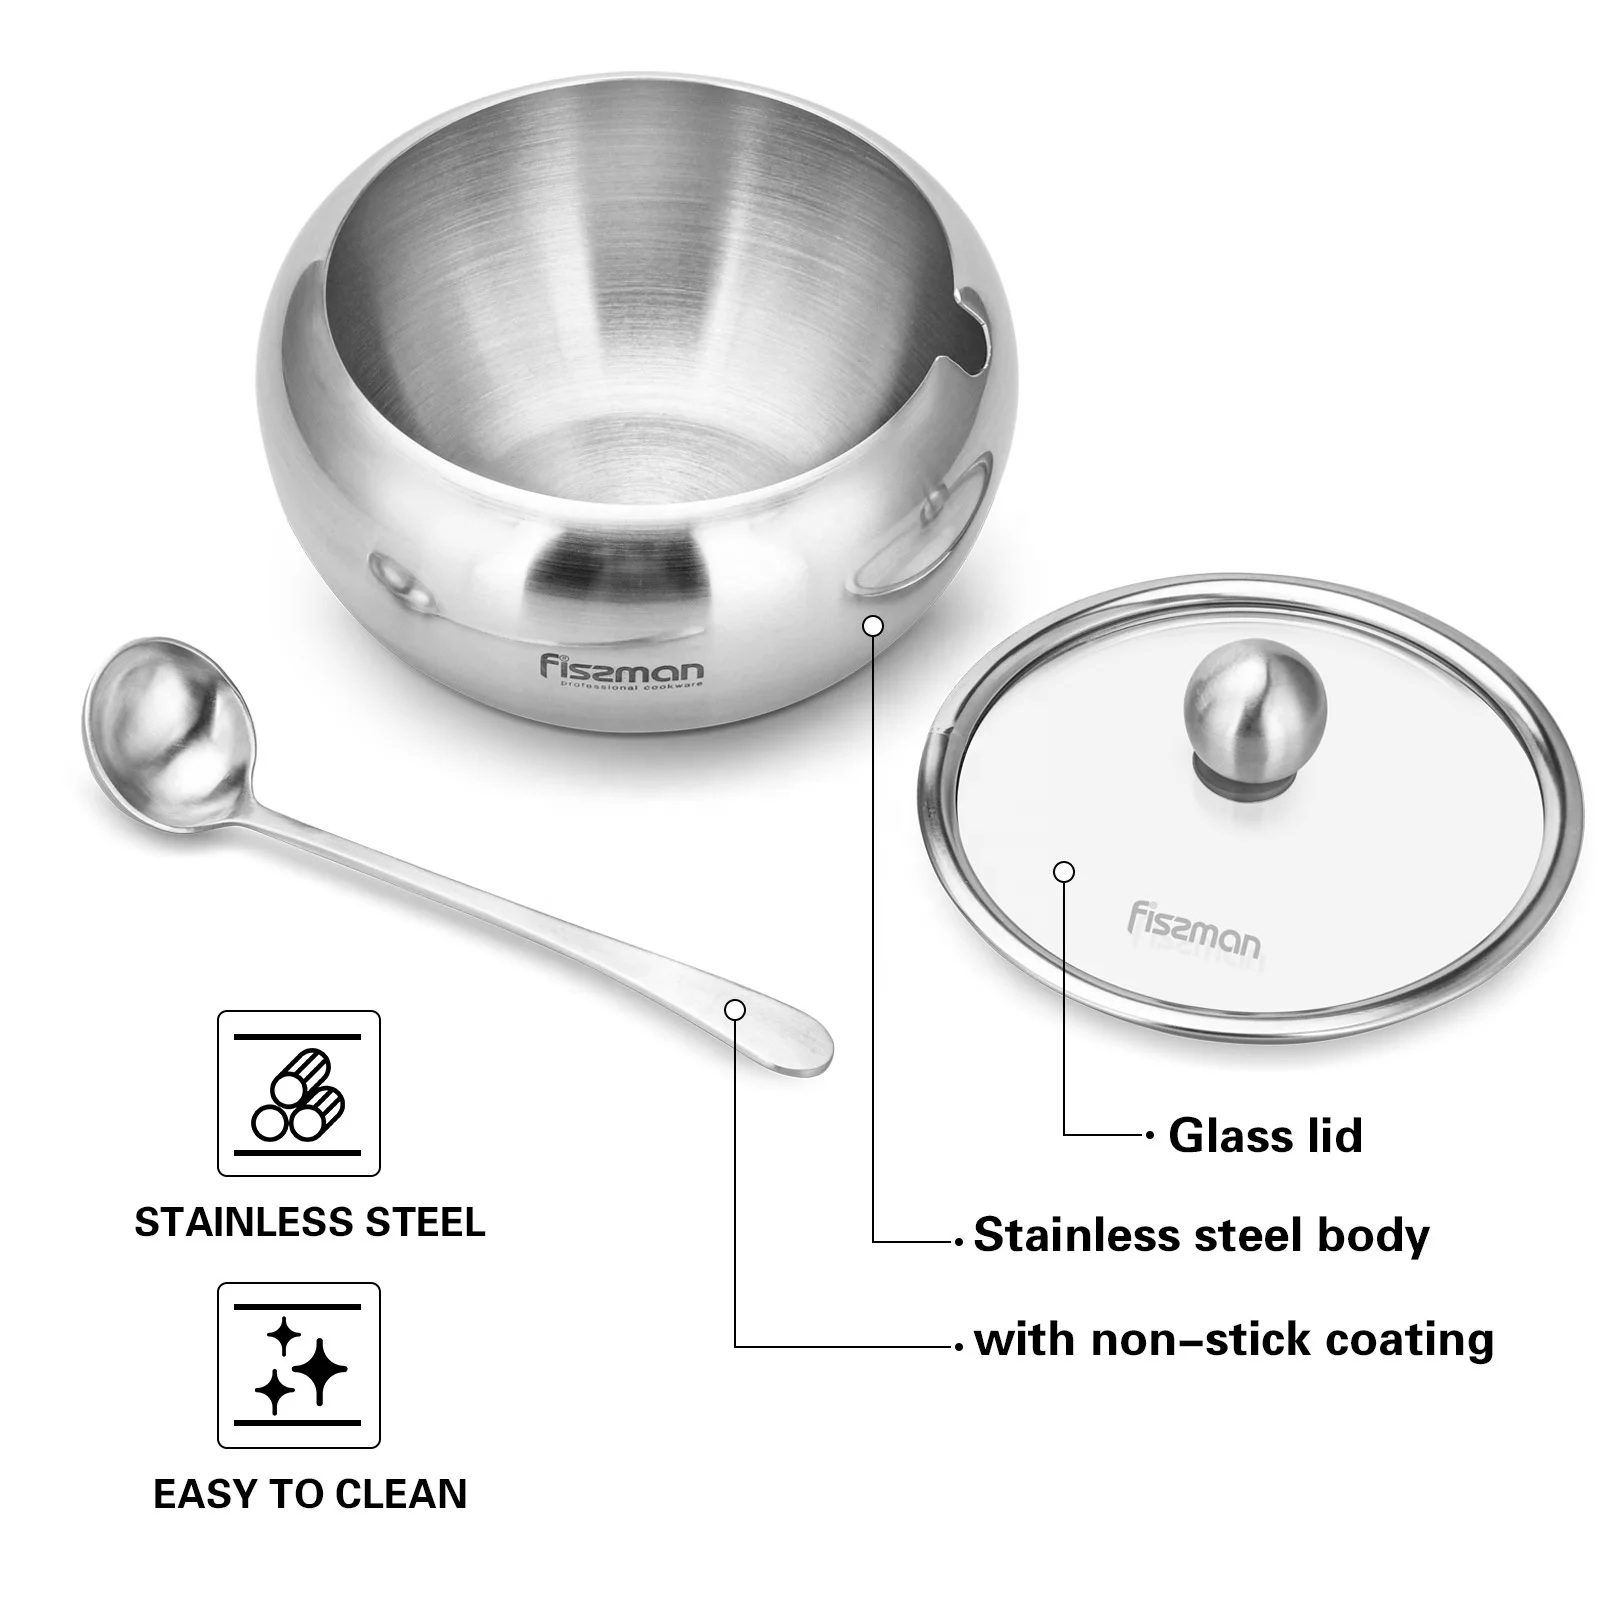 and Sugar Spoon for Home and Kitchen 3PS for better recognition HYTX Stainless Steel Sugar Bowl with Glass Oblique Opening Lid 